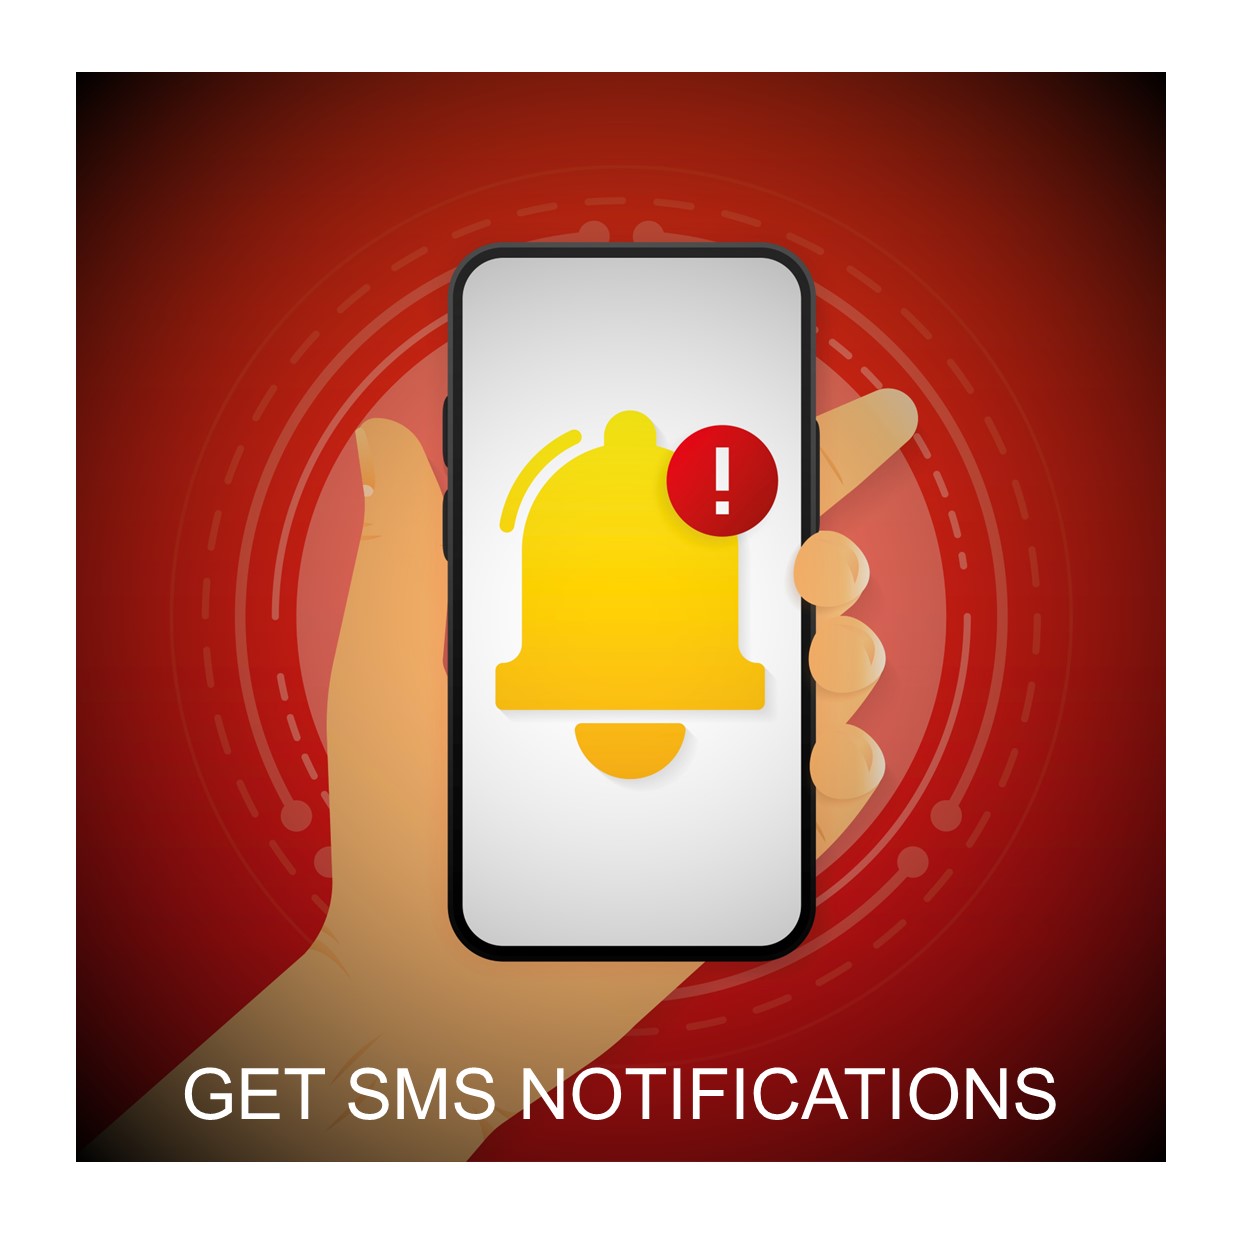 Register to receive SMS when Harvest/Movement bans are in place